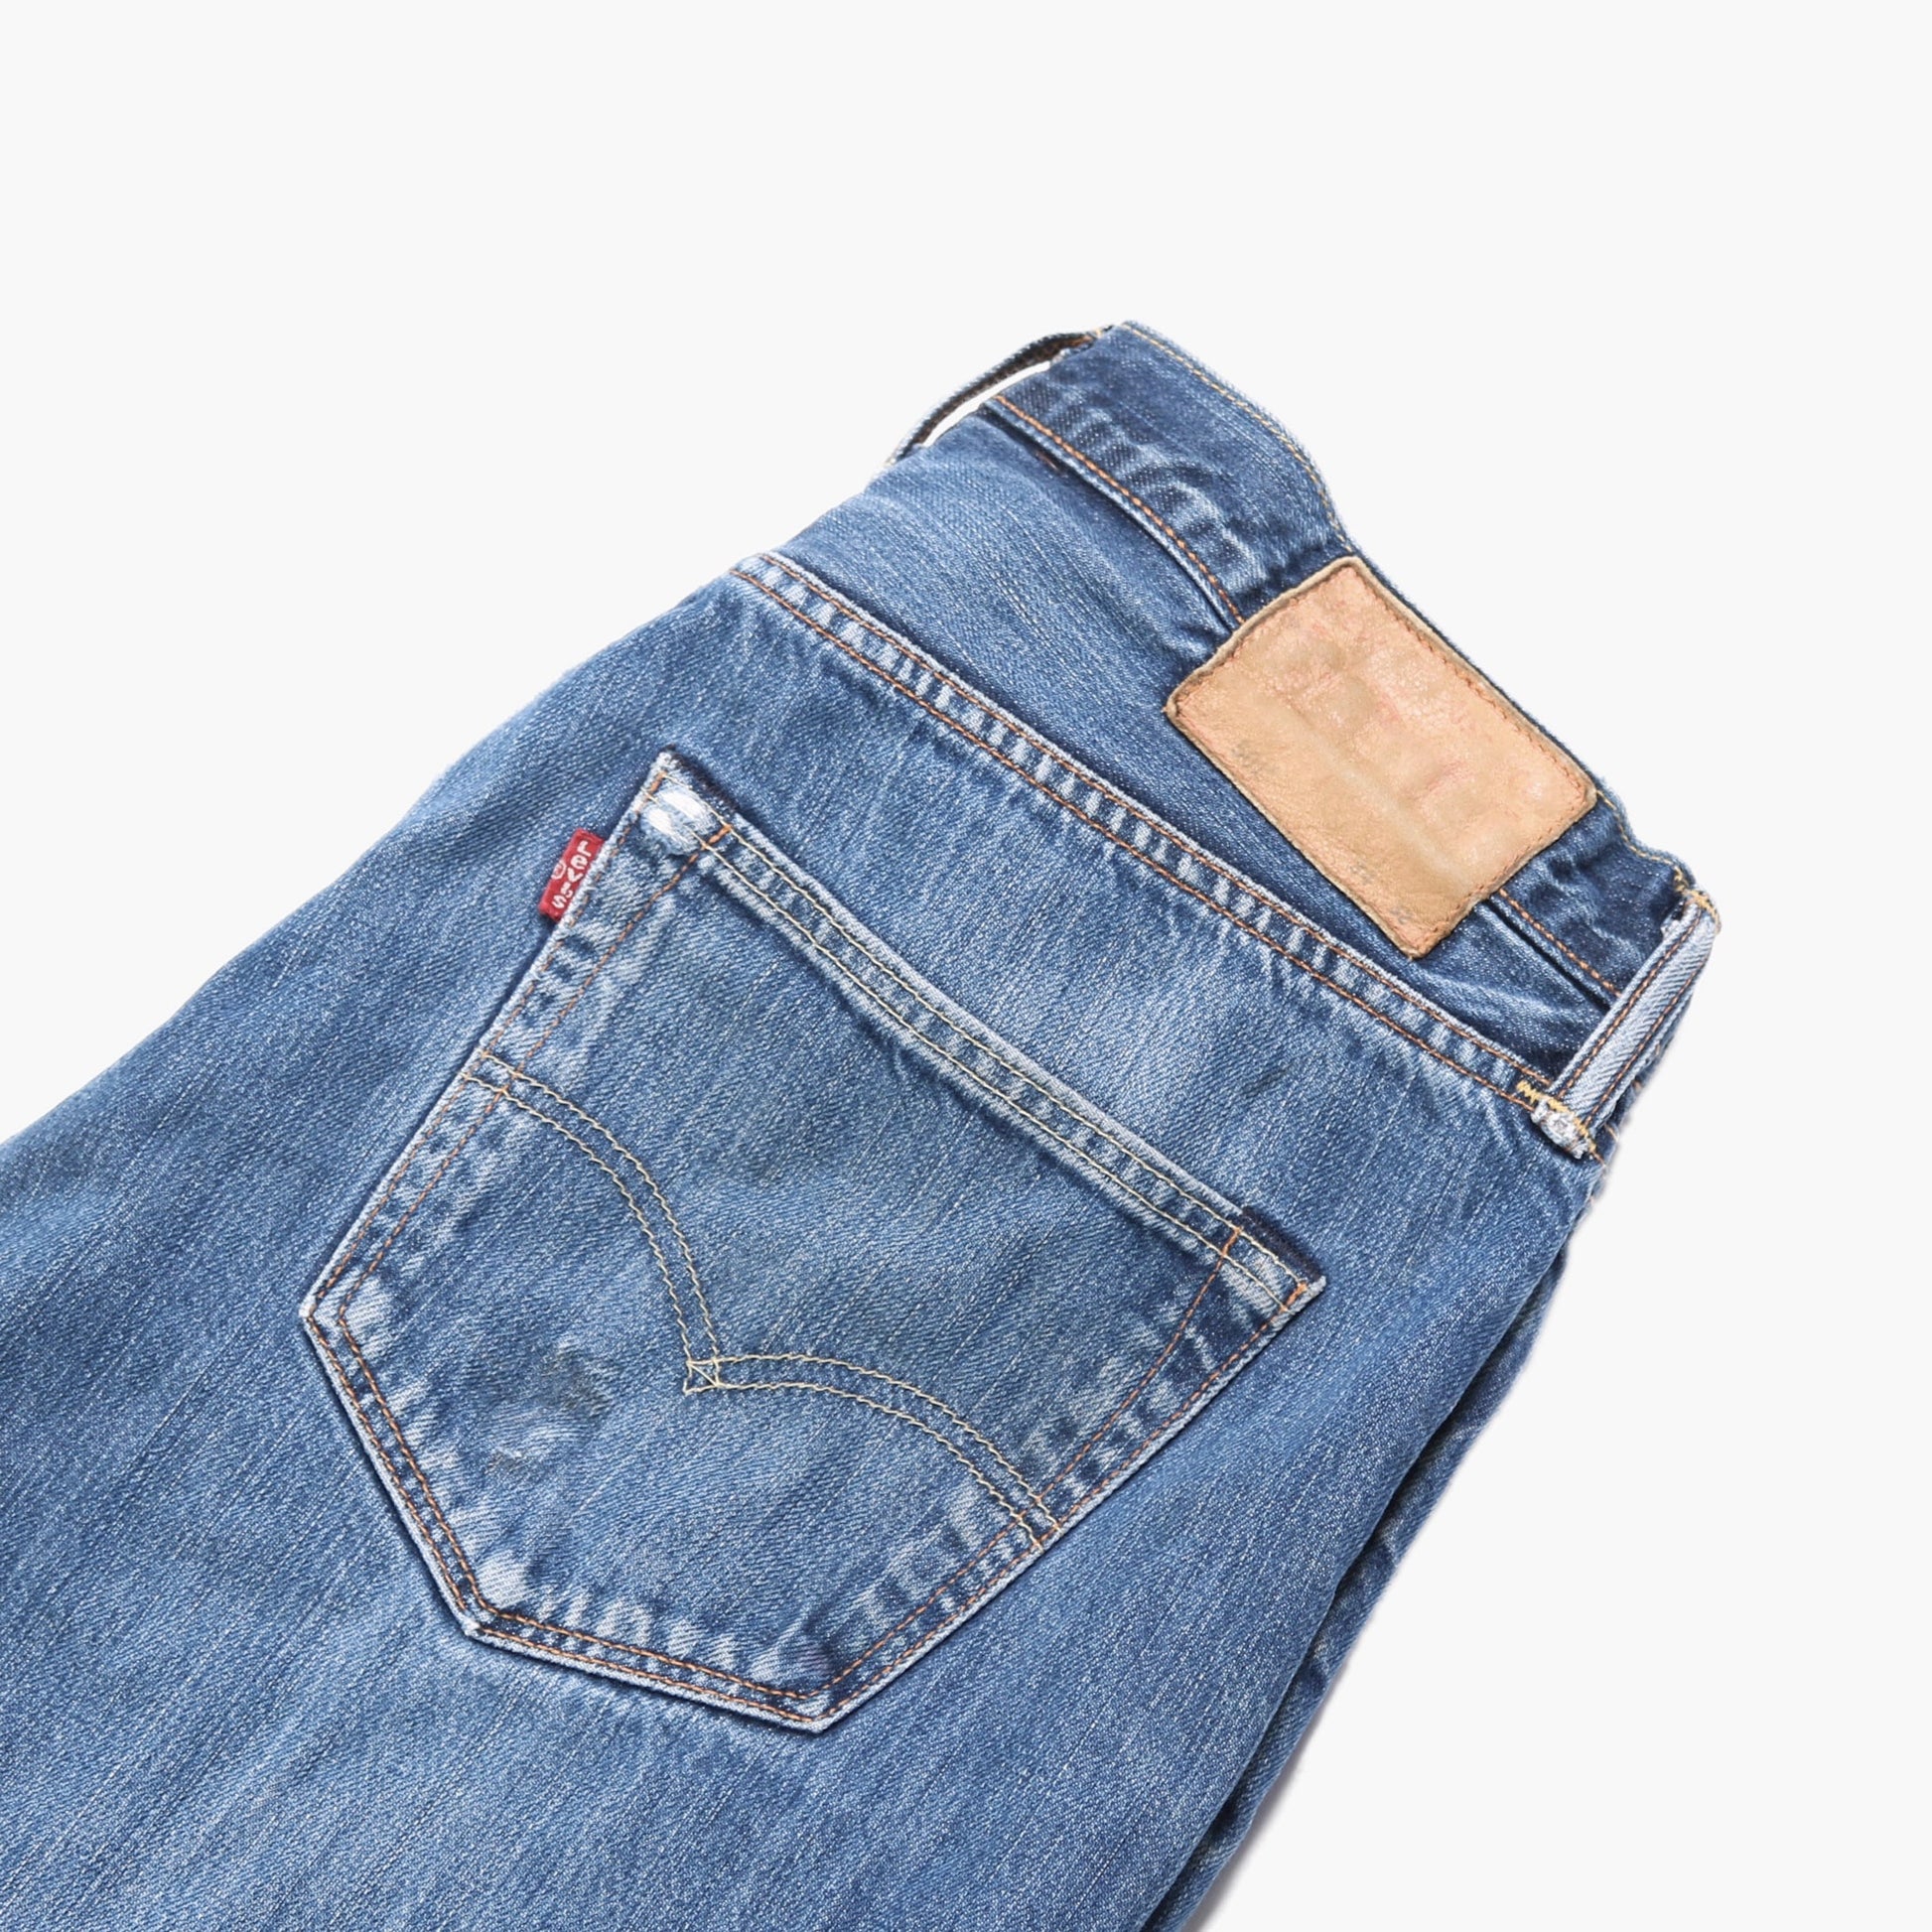 Vintage Levi's 501 Jeans - 34" 32" - American Madness